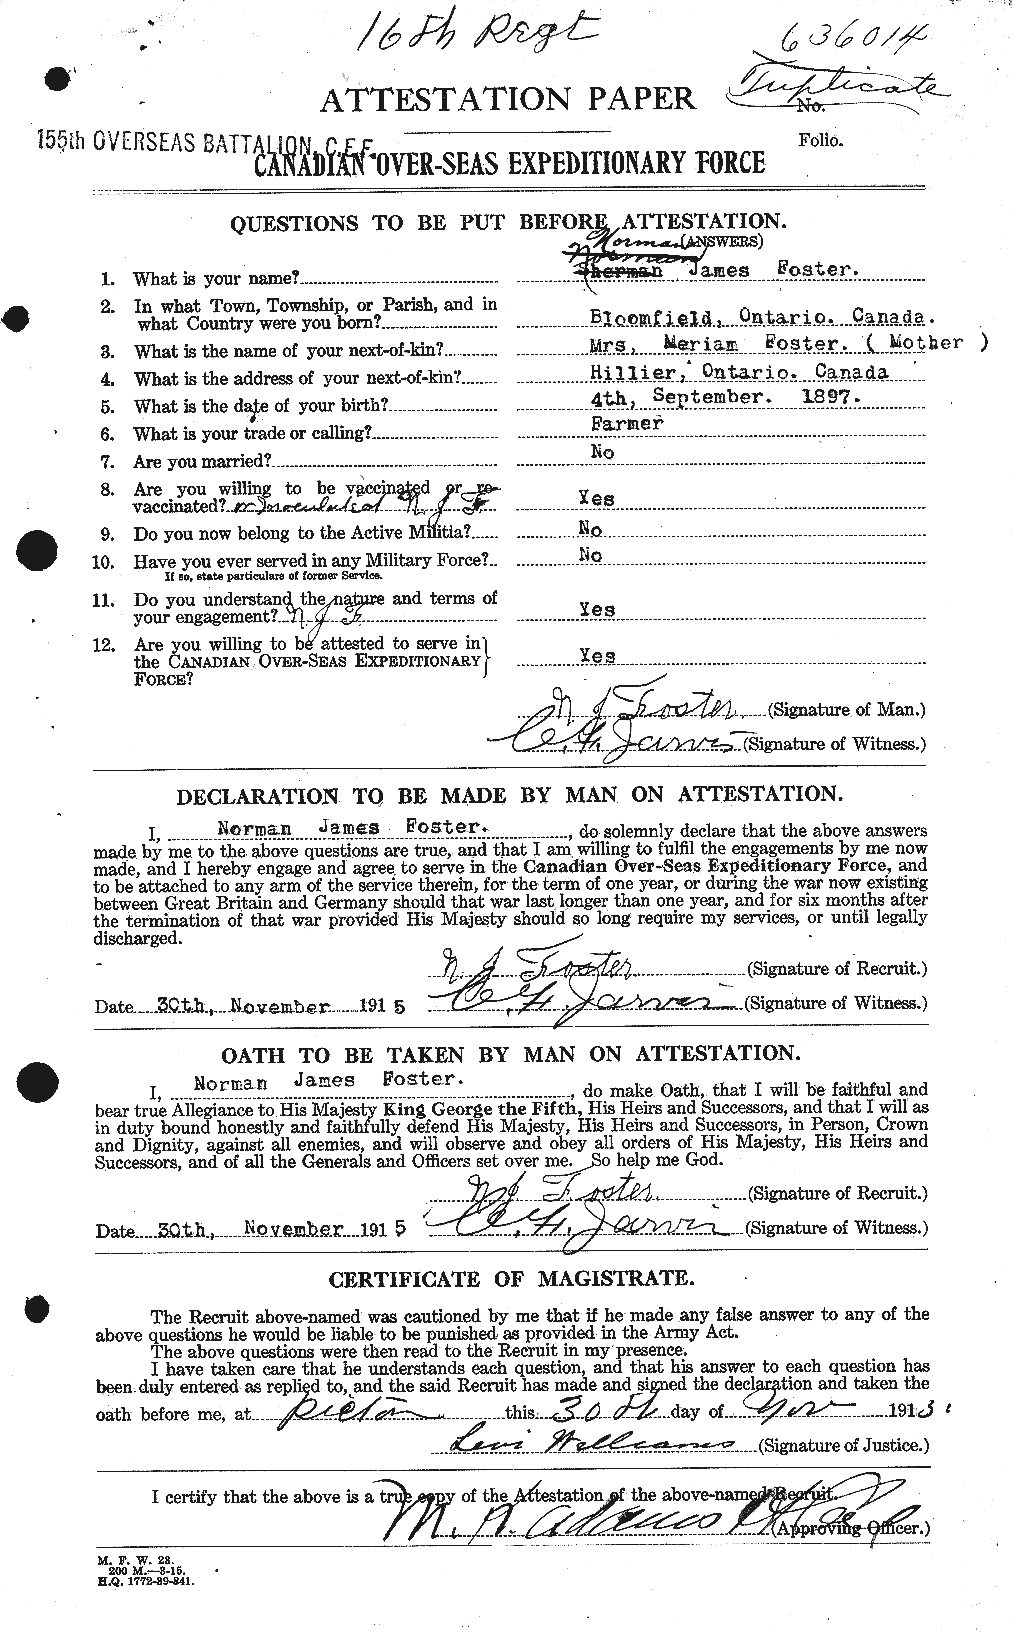 Personnel Records of the First World War - CEF 333435a